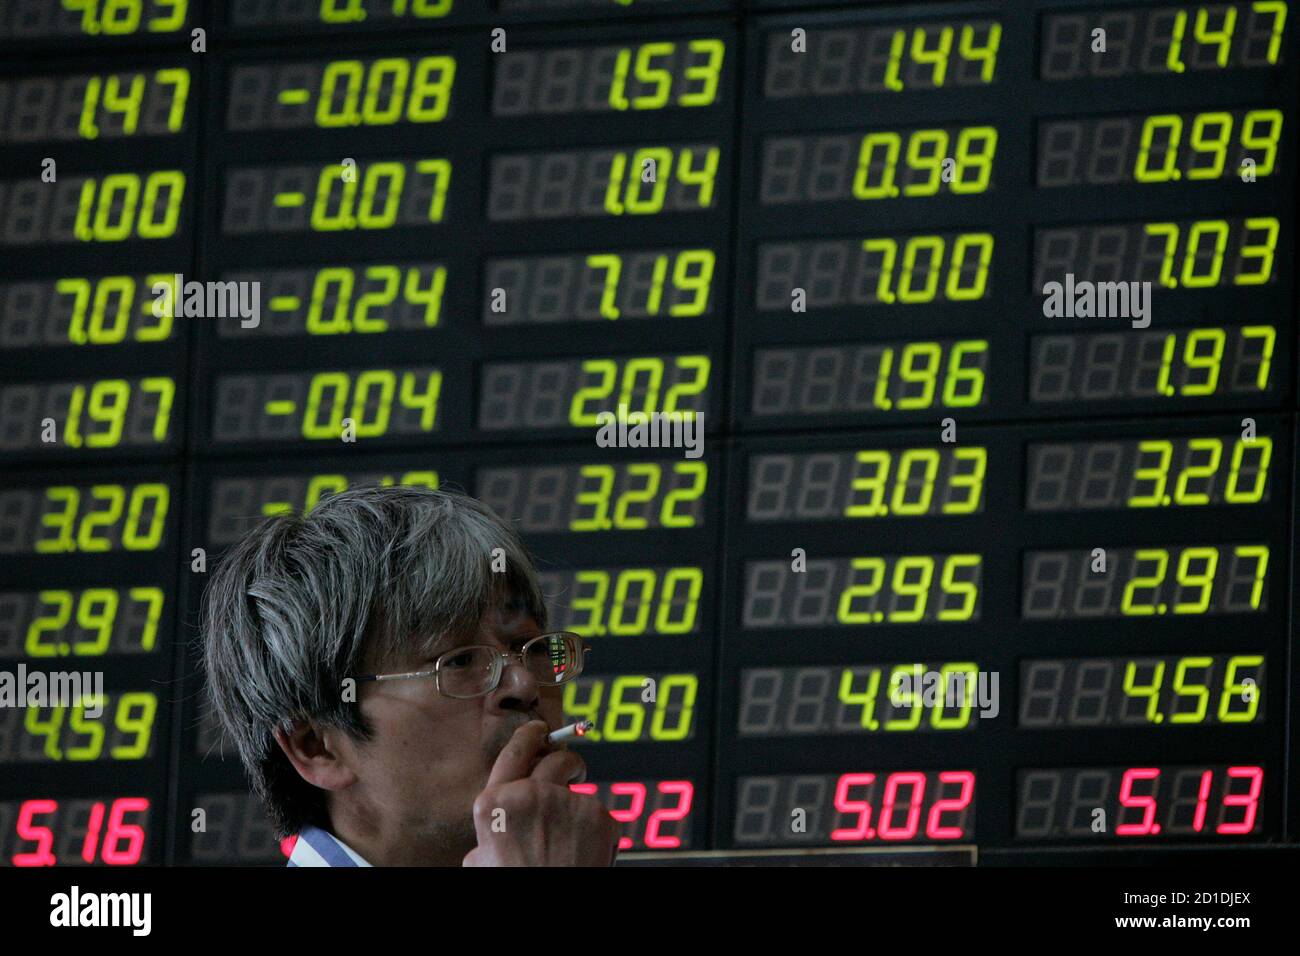 A man smokes in front of an electronic stock information board at a brokerage house in Shanghai October 6, 2008. China's stock market, resuming trade on Monday after a week-long national holiday, opened lower in response to sliding overseas markets and fears of a global economic slowdown. REUTERS/Aly Song (CHINA) Stock Photo